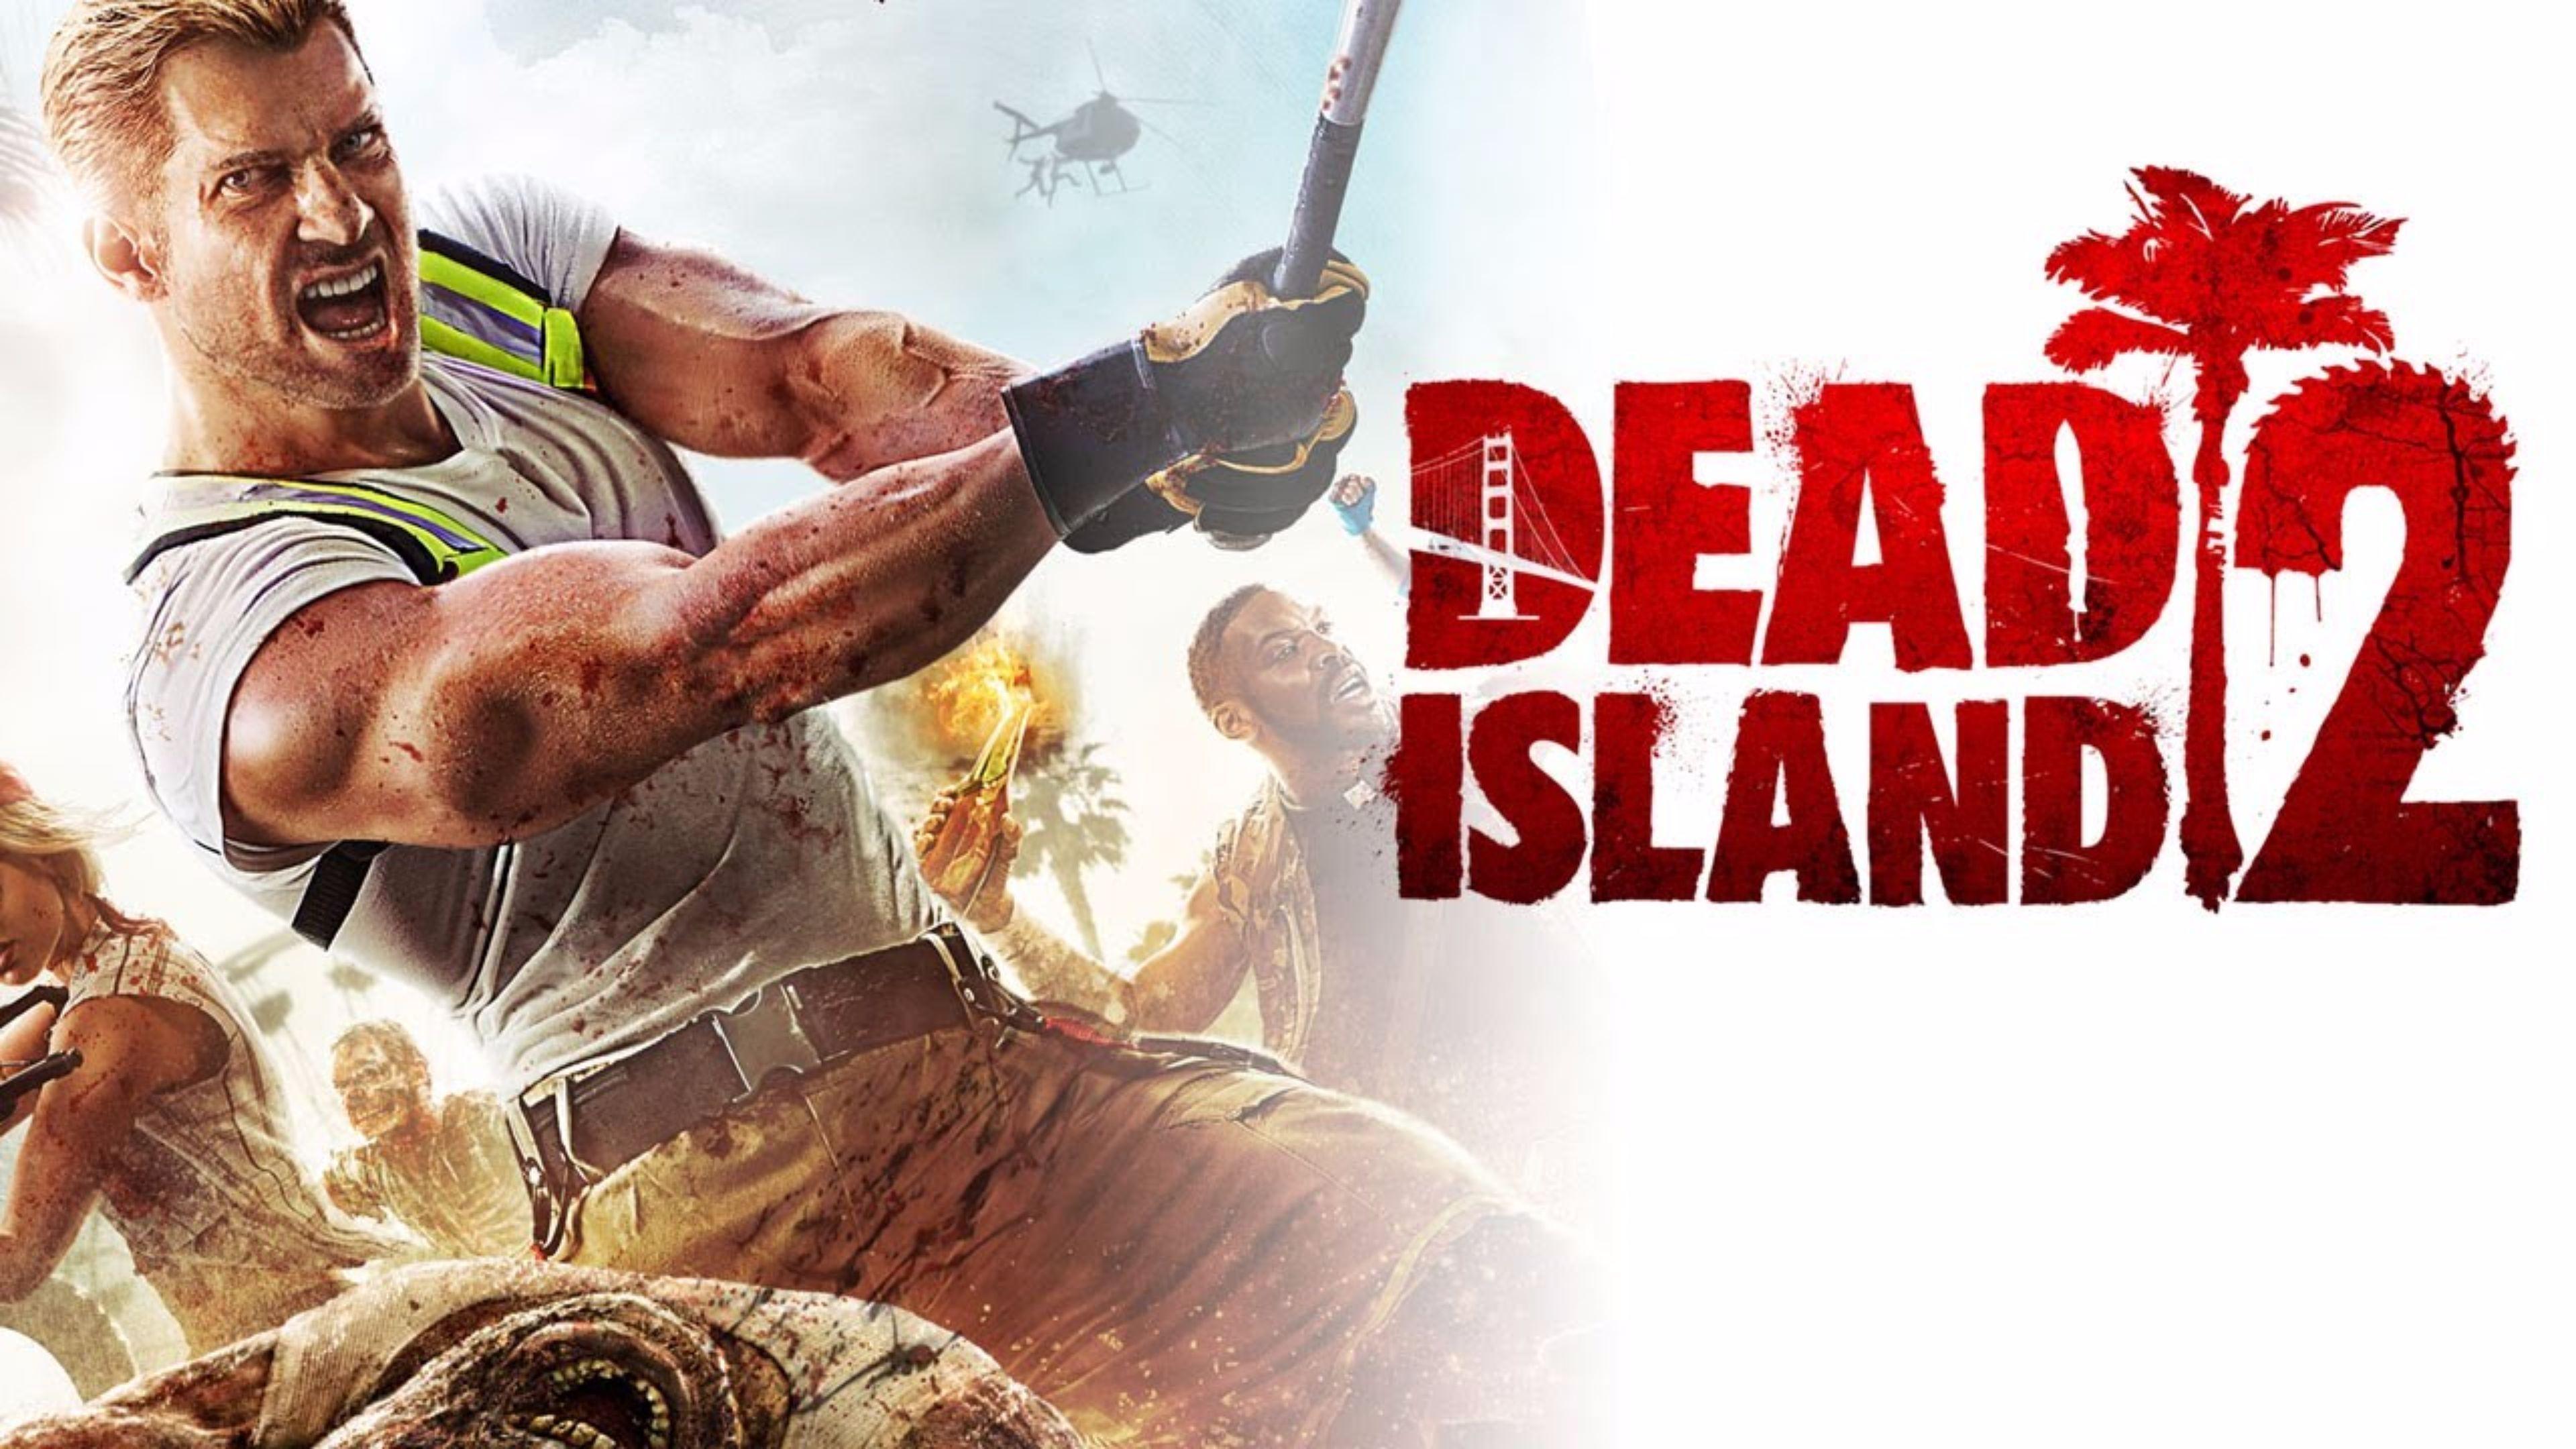 was dead island 2 cancelled